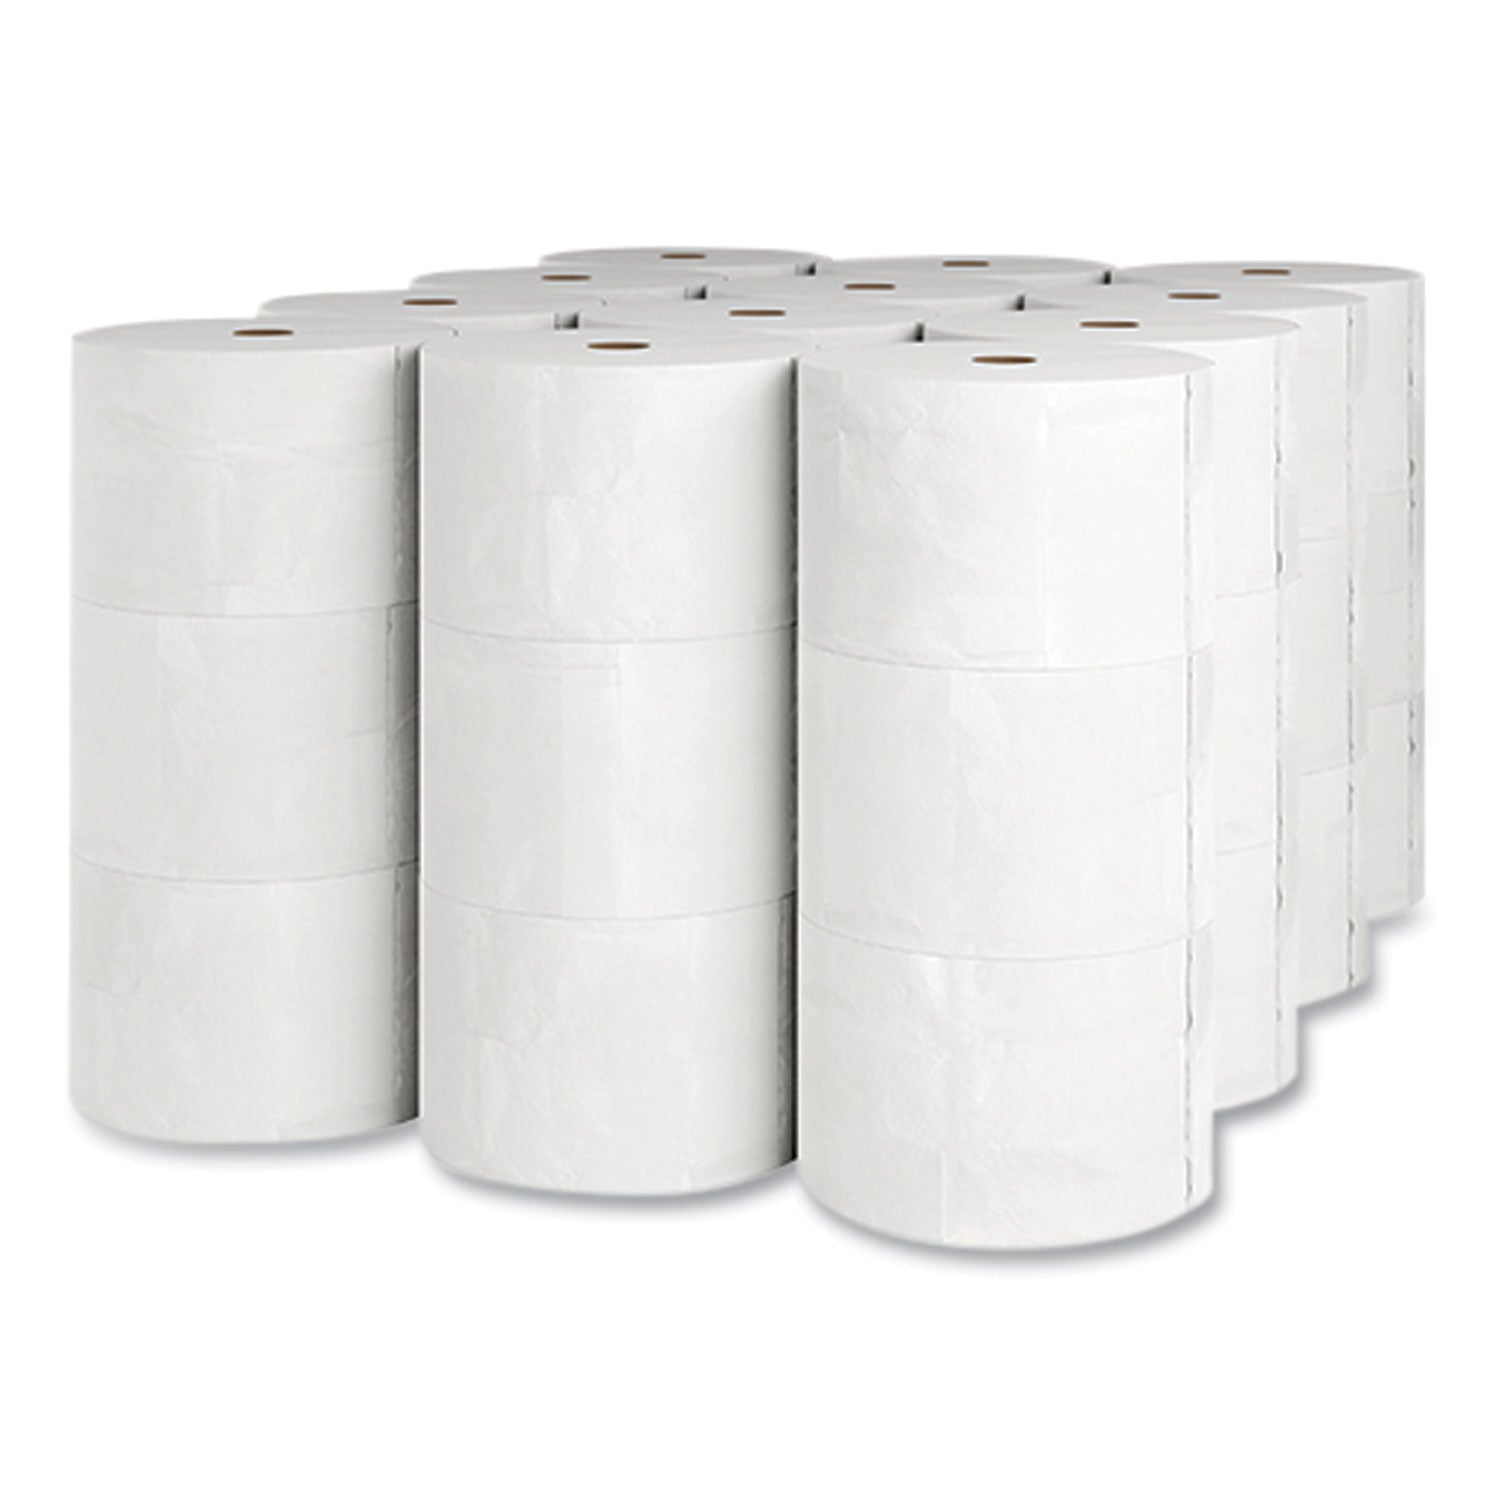 j-series-2-ply-small-core-bath-tissue-septic-safe-white-1000-sheets-roll-36-rolls-carton_cwz24405974 - 2